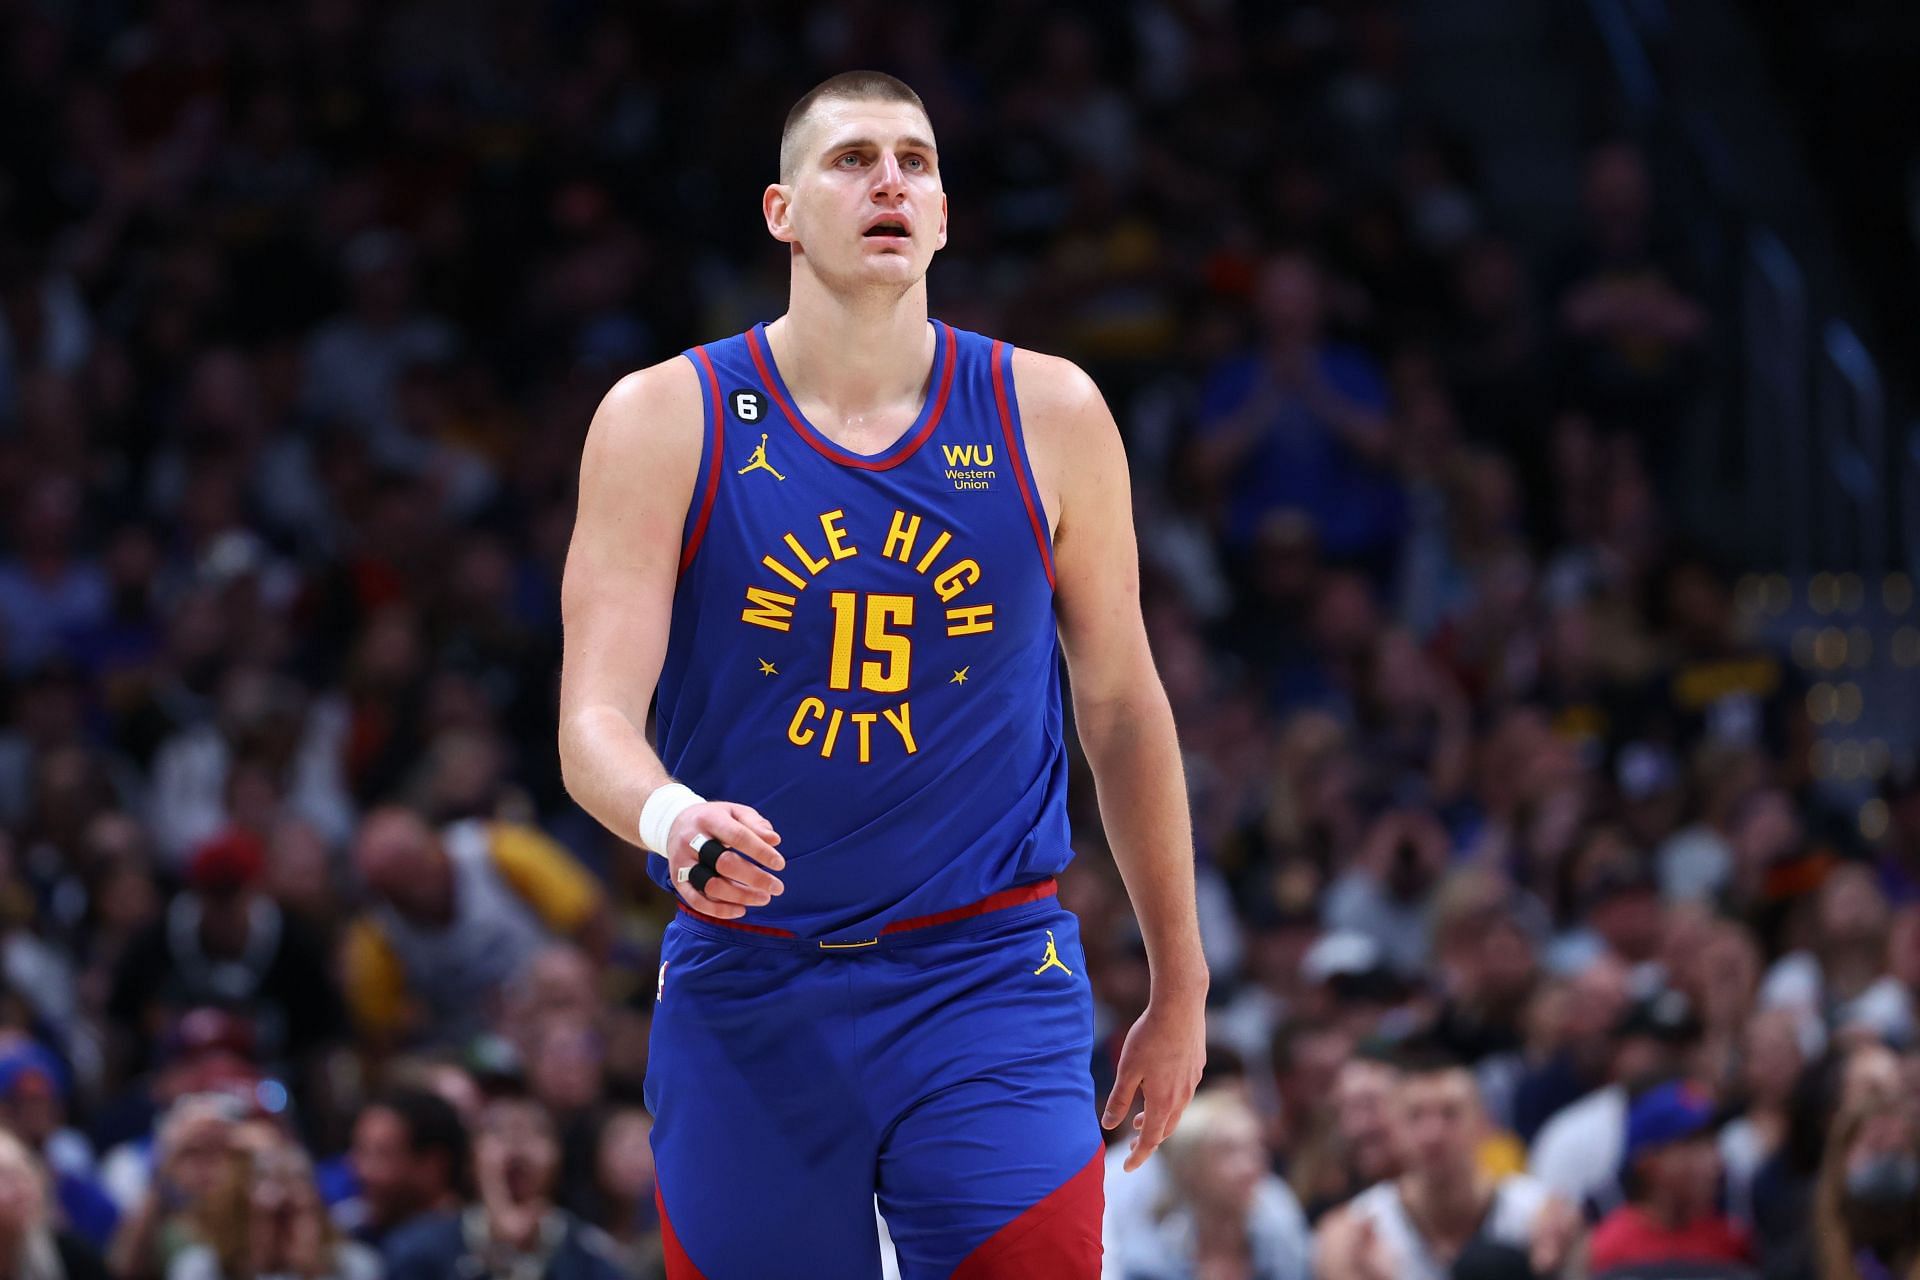 A suit means business': Nuggets' Nikola Jokic admits he 'doesn't